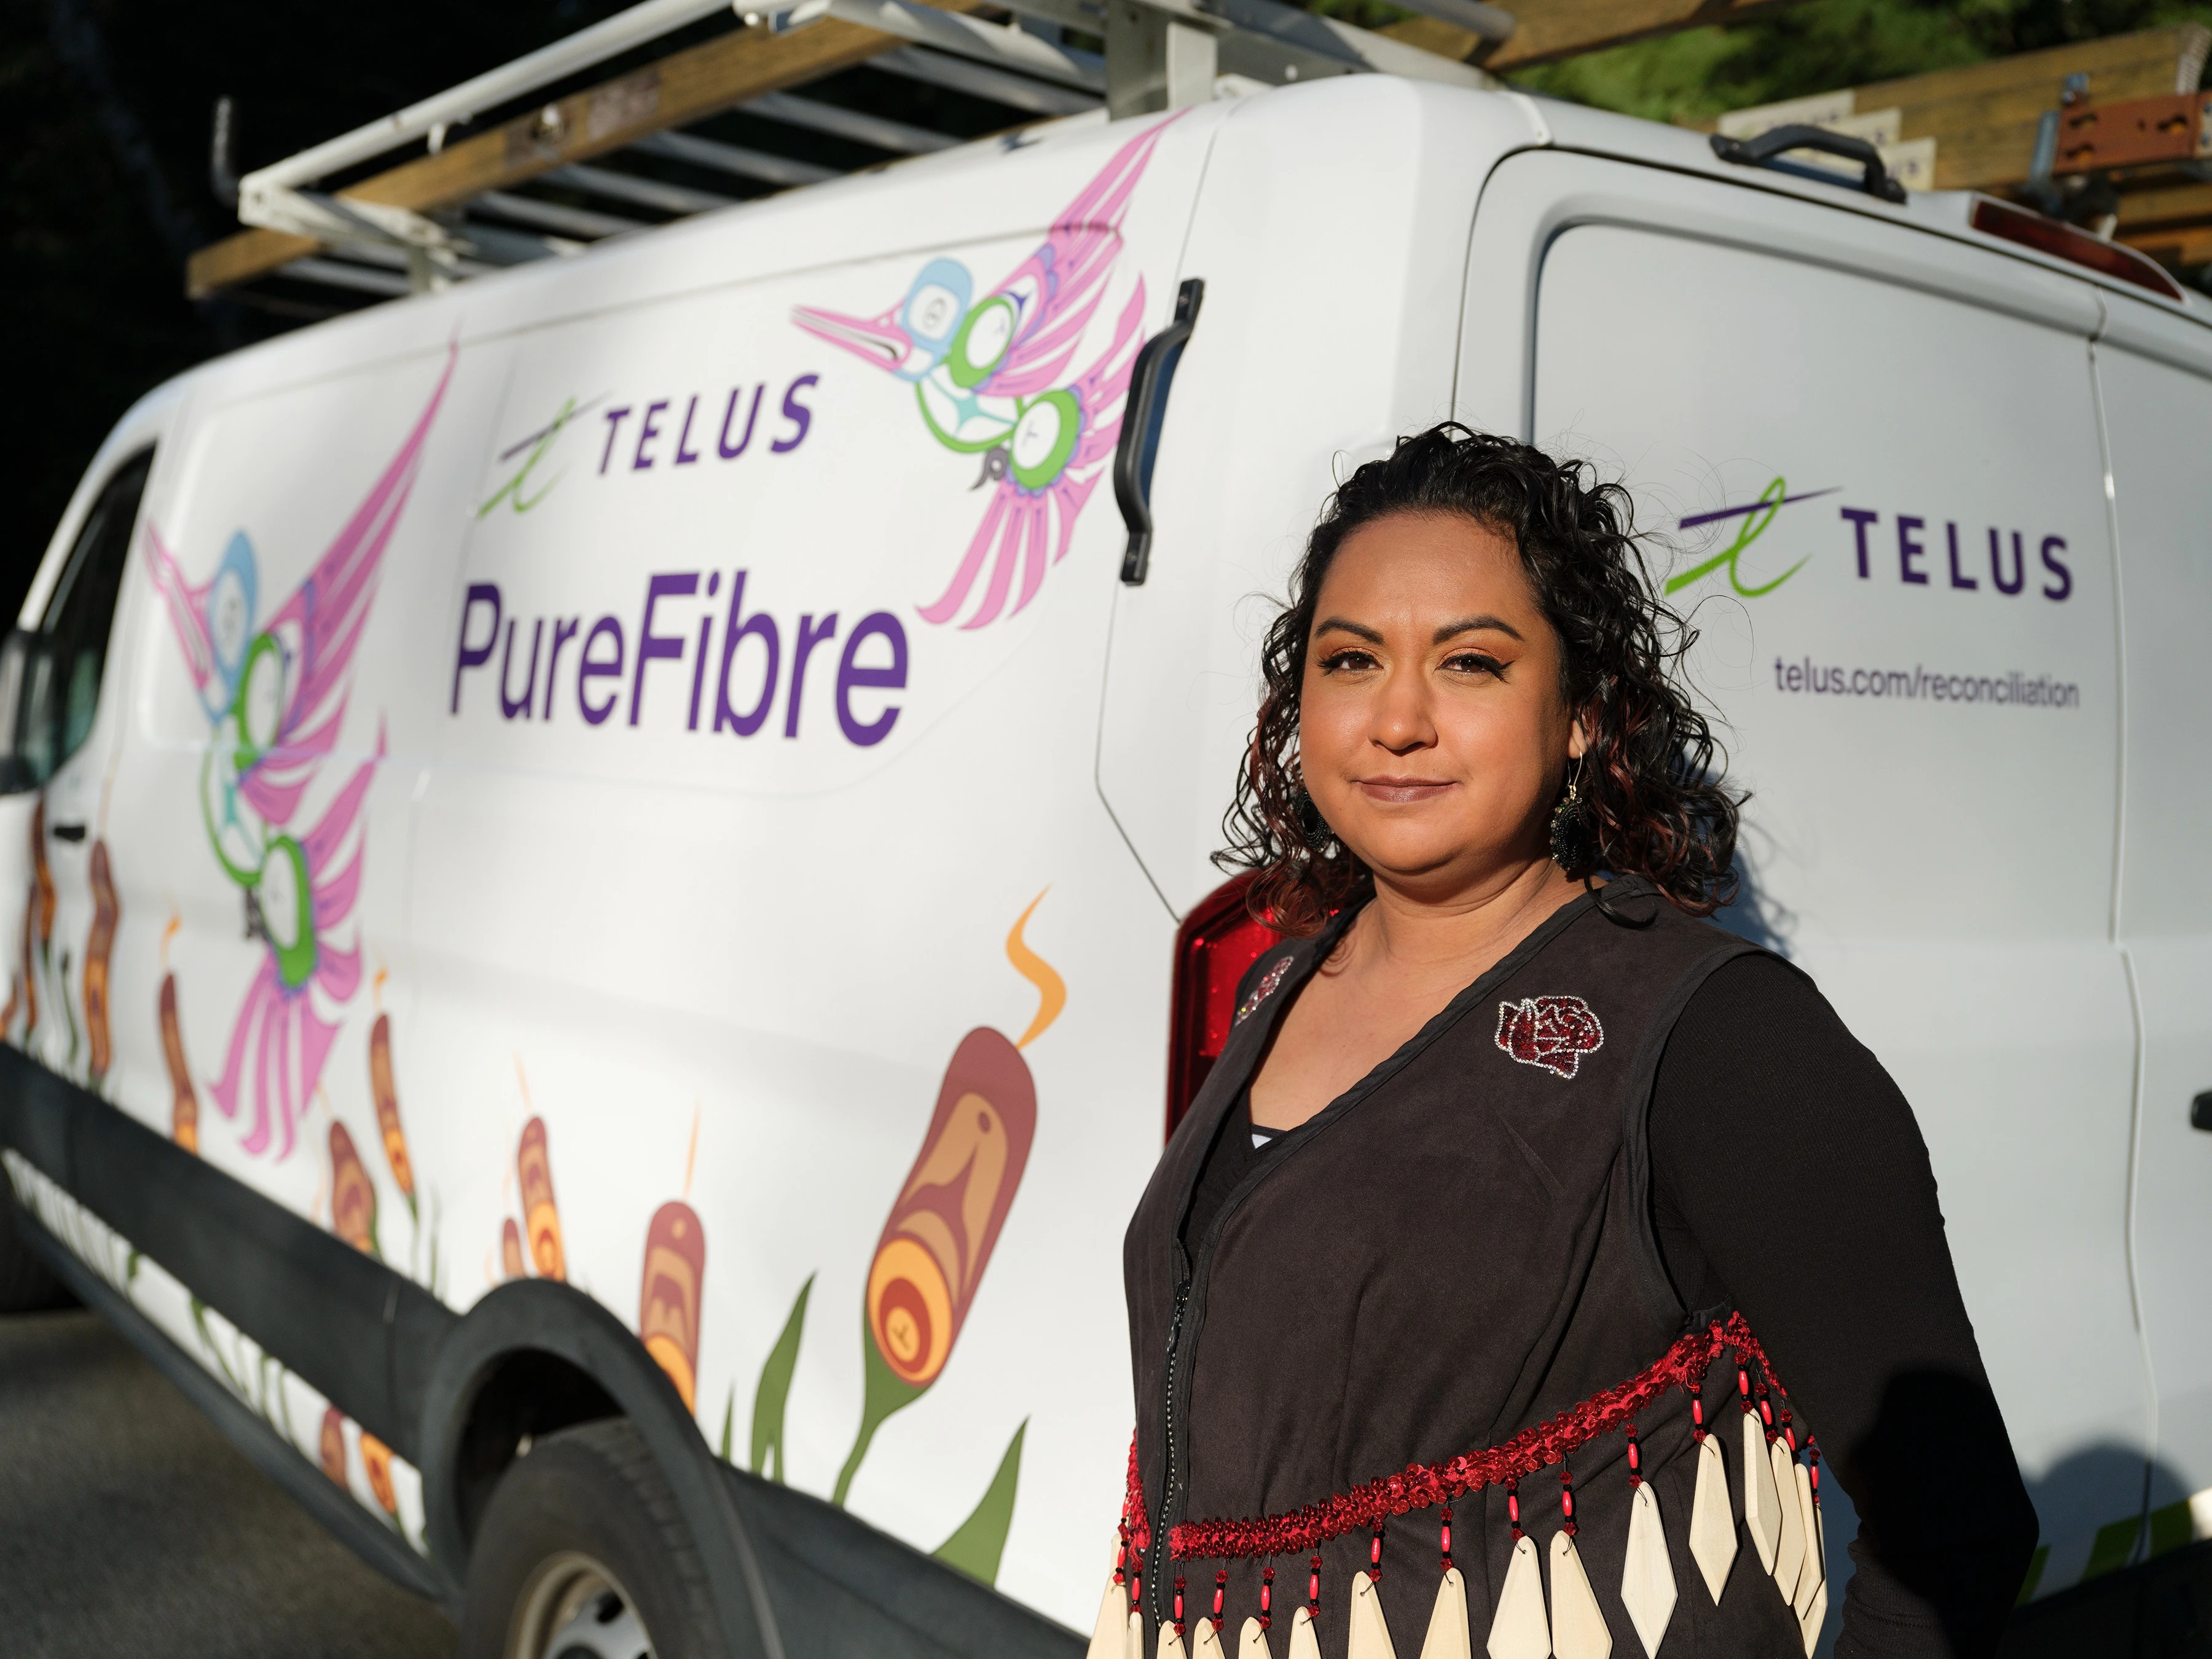 Deanna-Marie Point in front of a TELUS PureFibre van